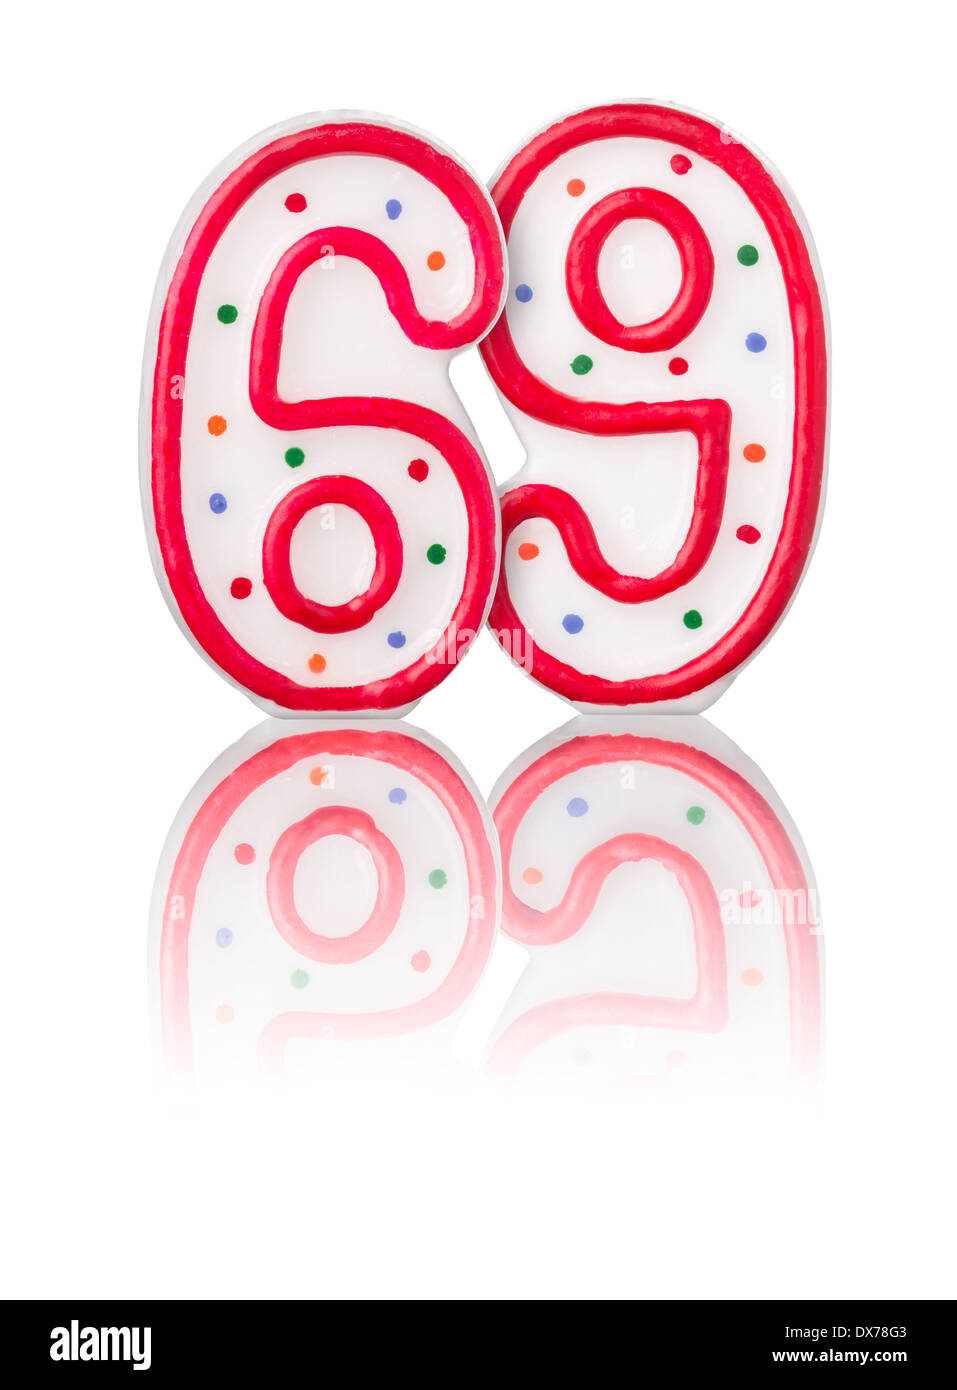 Red number 69 with reflection on a white background Stock Photo